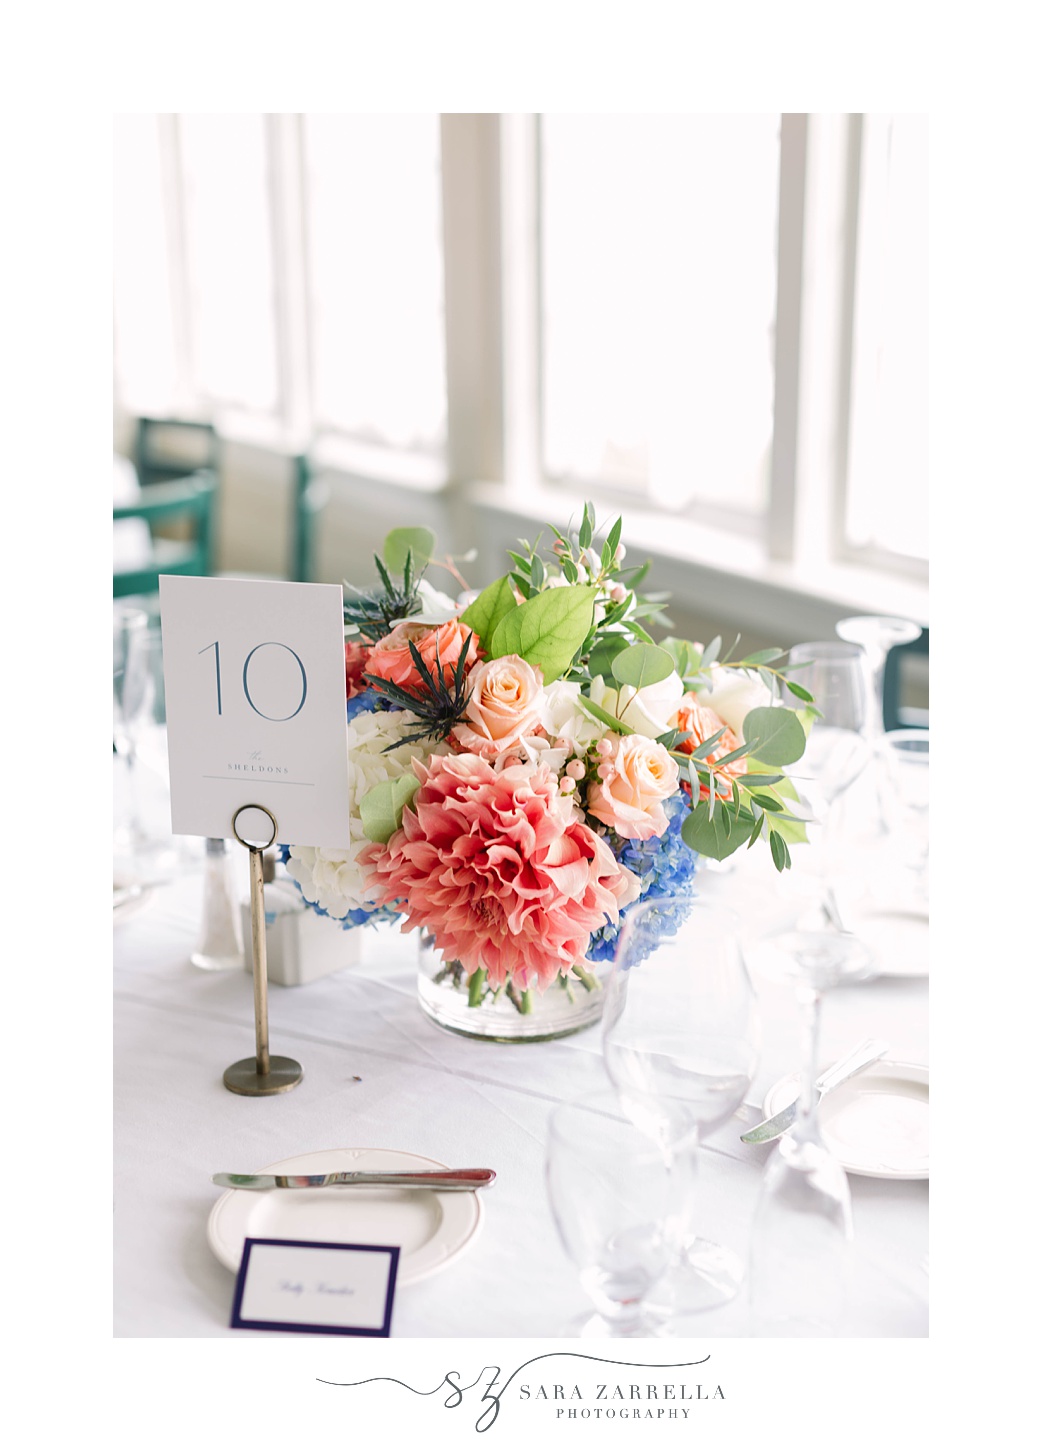 colorful floral centerpieces for The Dunes Club wedding reception